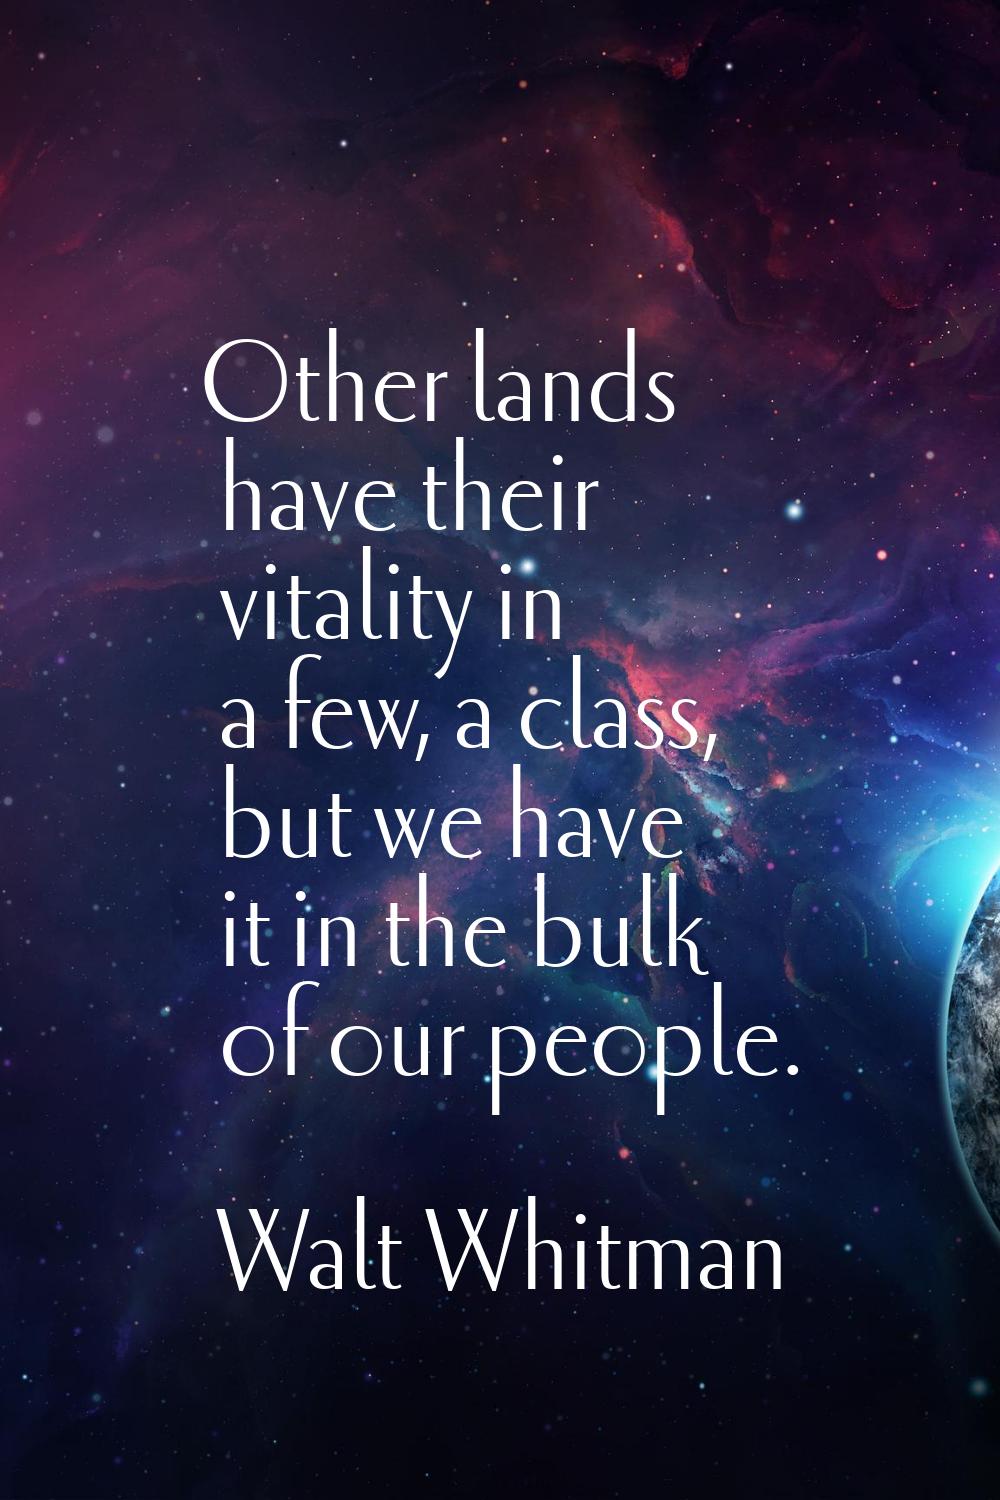 Other lands have their vitality in a few, a class, but we have it in the bulk of our people.